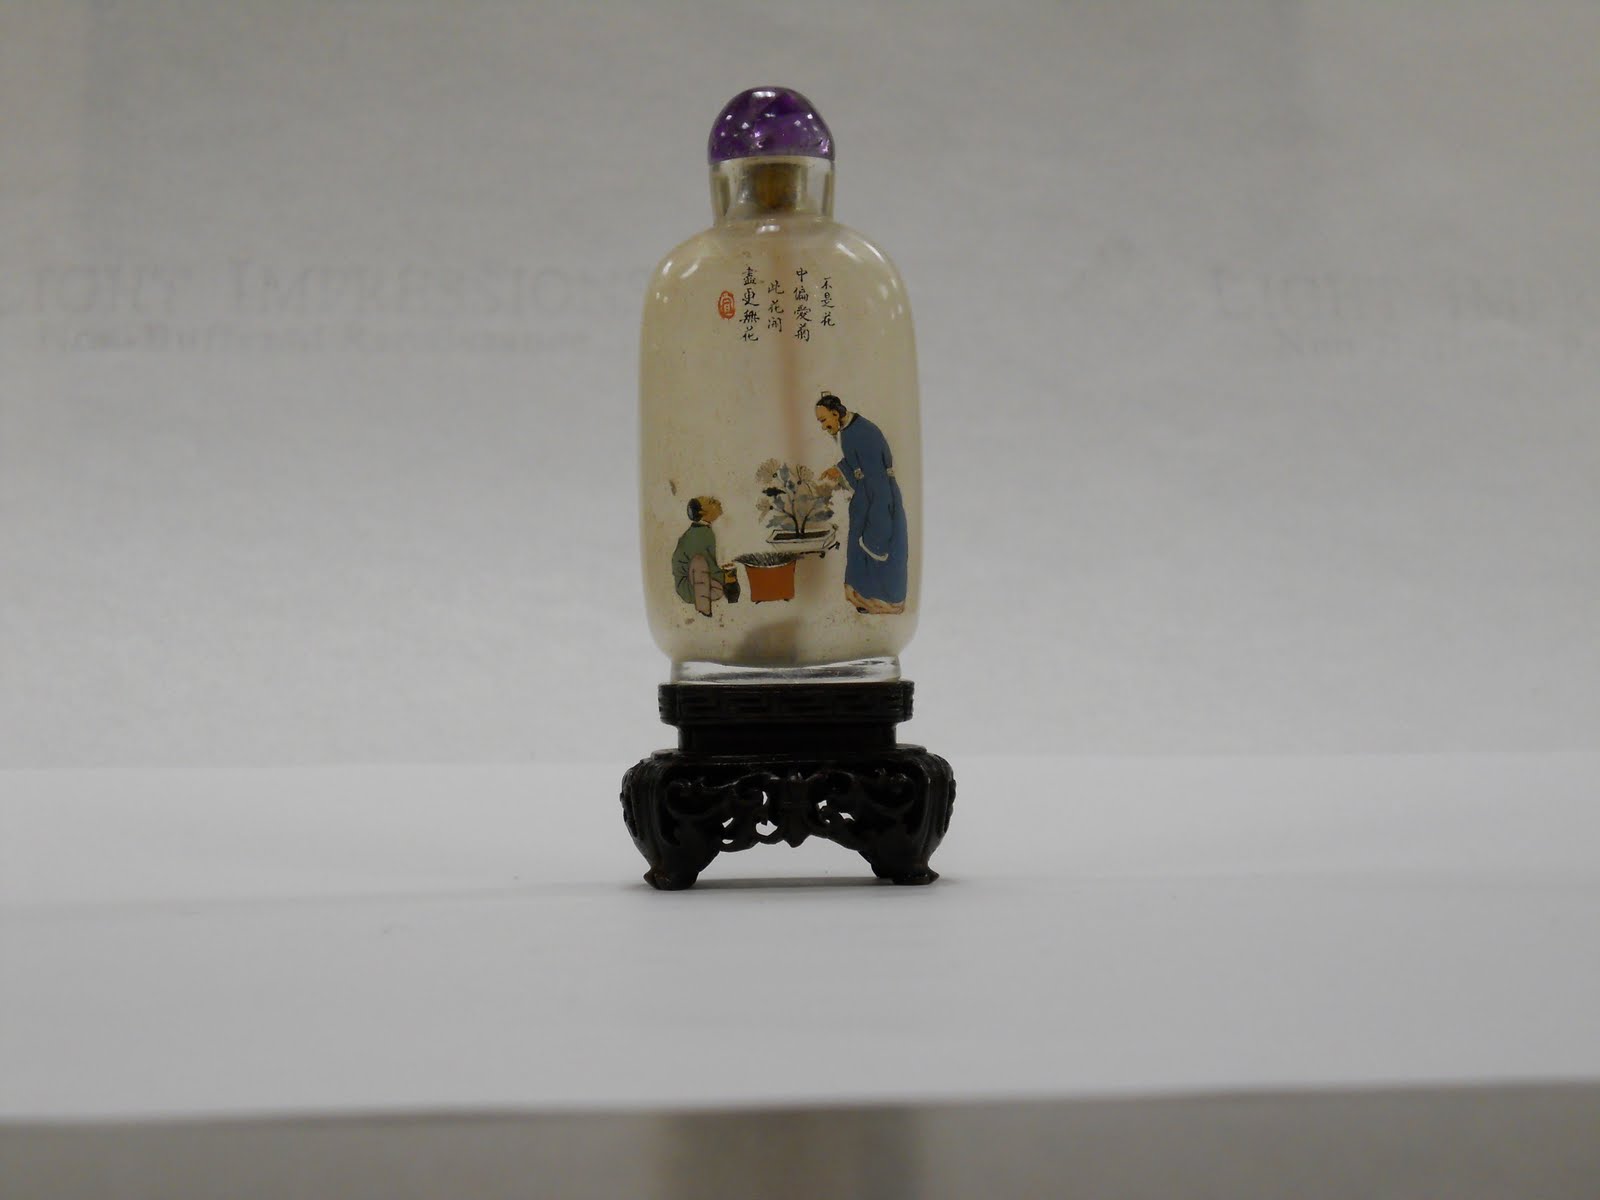 Chinese snuff bottle with black Chinese characters above a colorful illustration of an older gentleman who is tending to a small tree in the presence of a younger male figure. The bottle is predominantly beige and has a deep purple top.